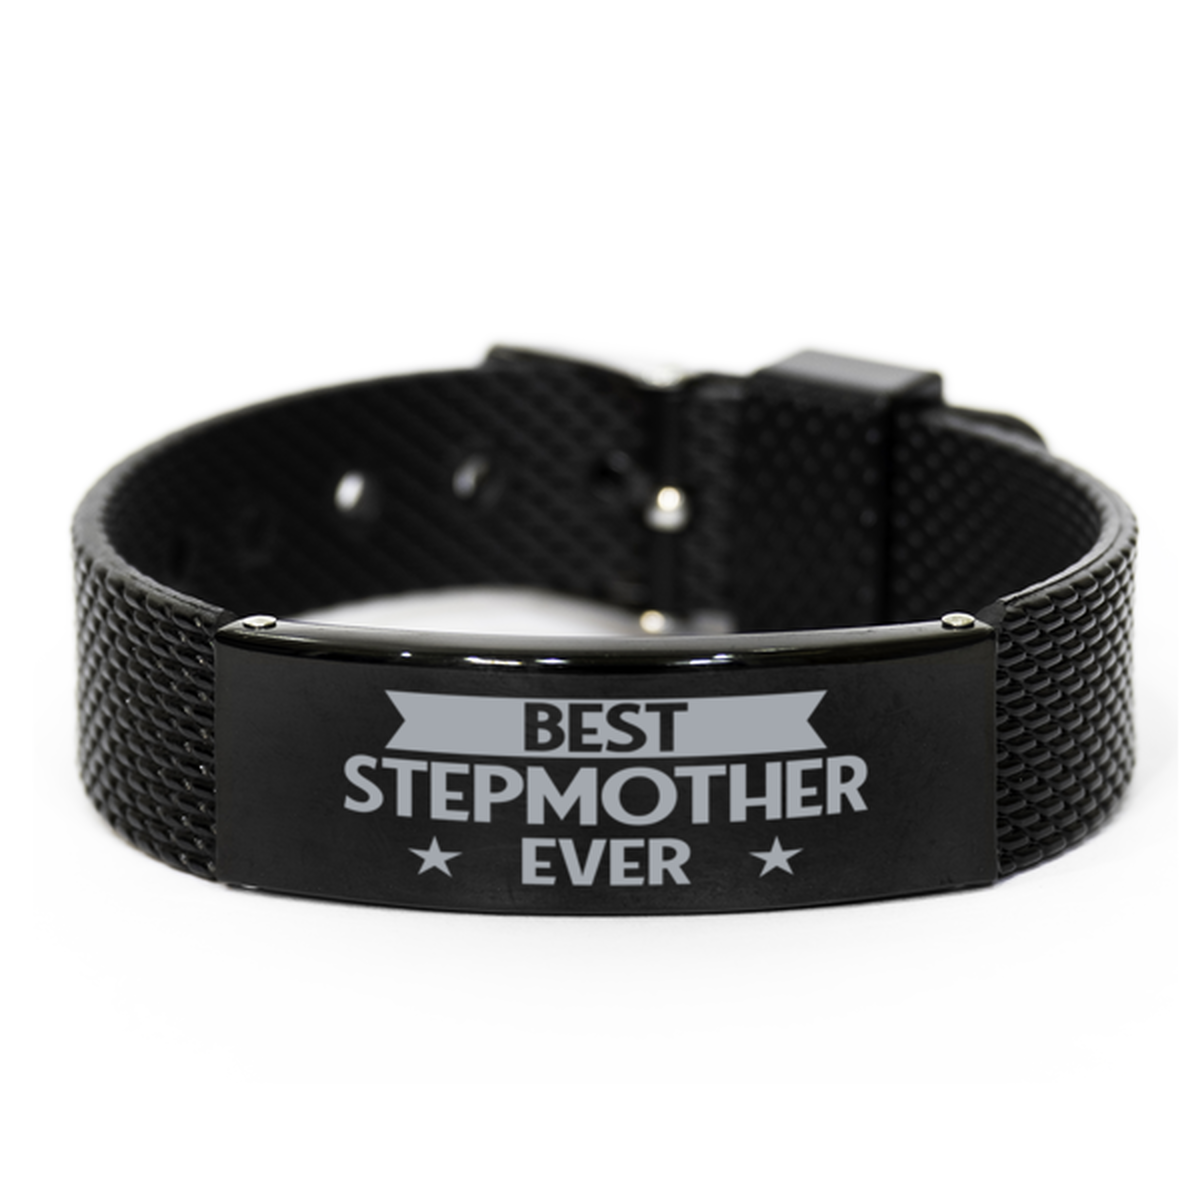 Best Stepmother Ever Stepmother Gifts, Gag Engraved Bracelet For Stepmother, Best Family Gifts For Women